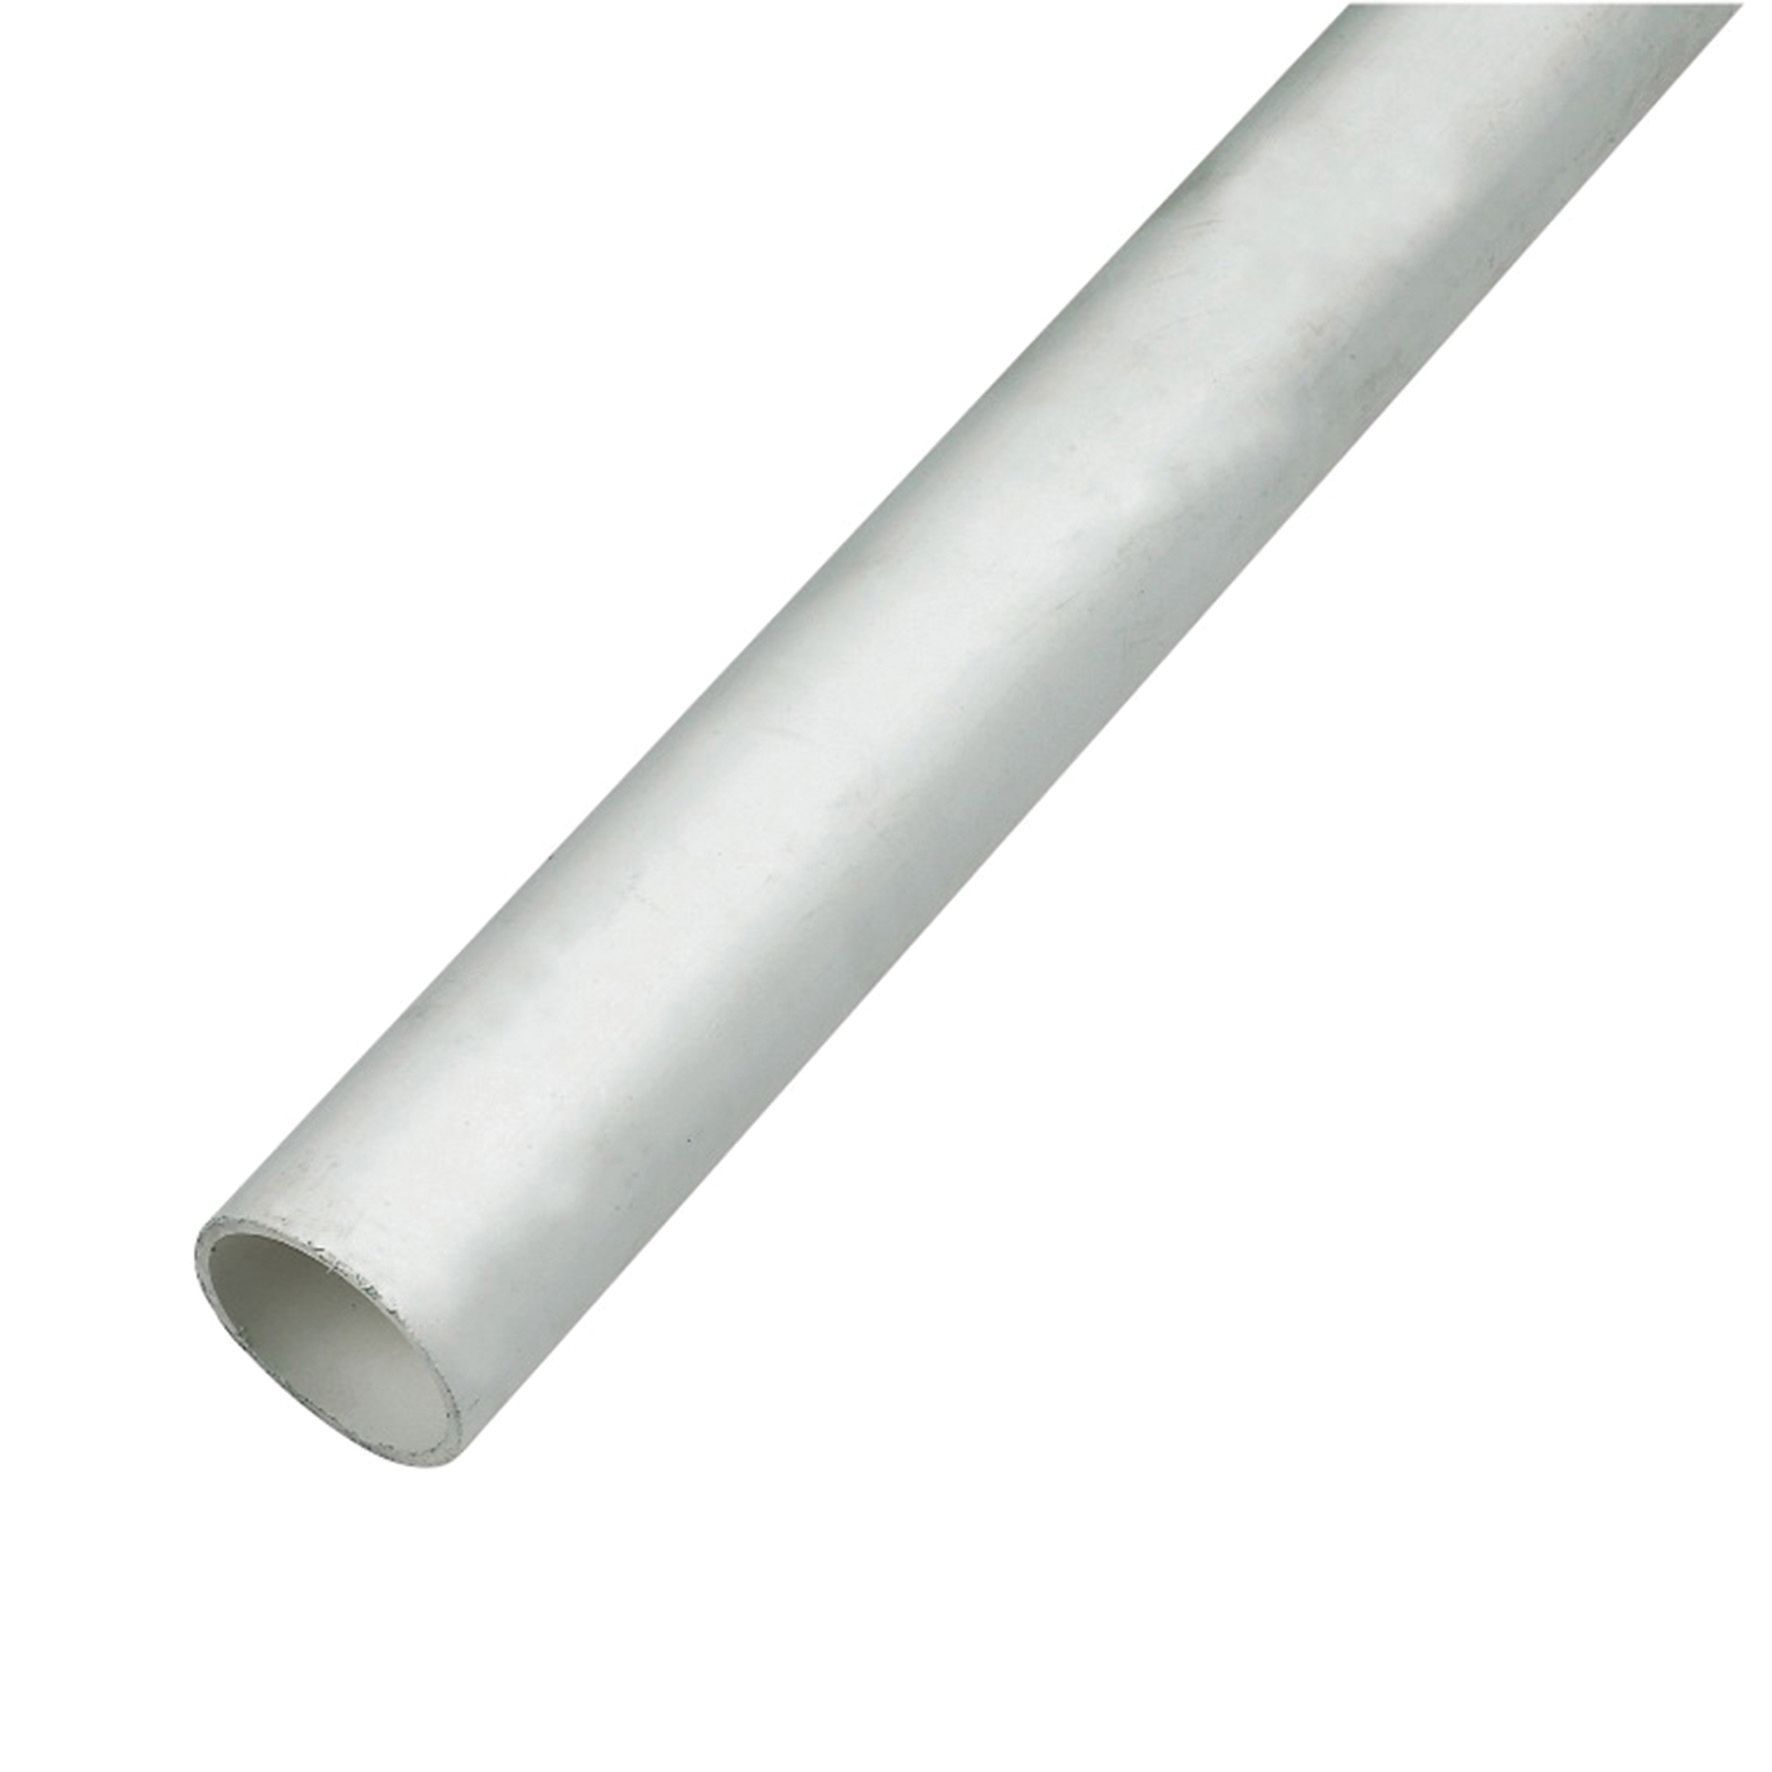 FloPlast WP01W Push-fit Waste Pipe - White 32mm x 3m